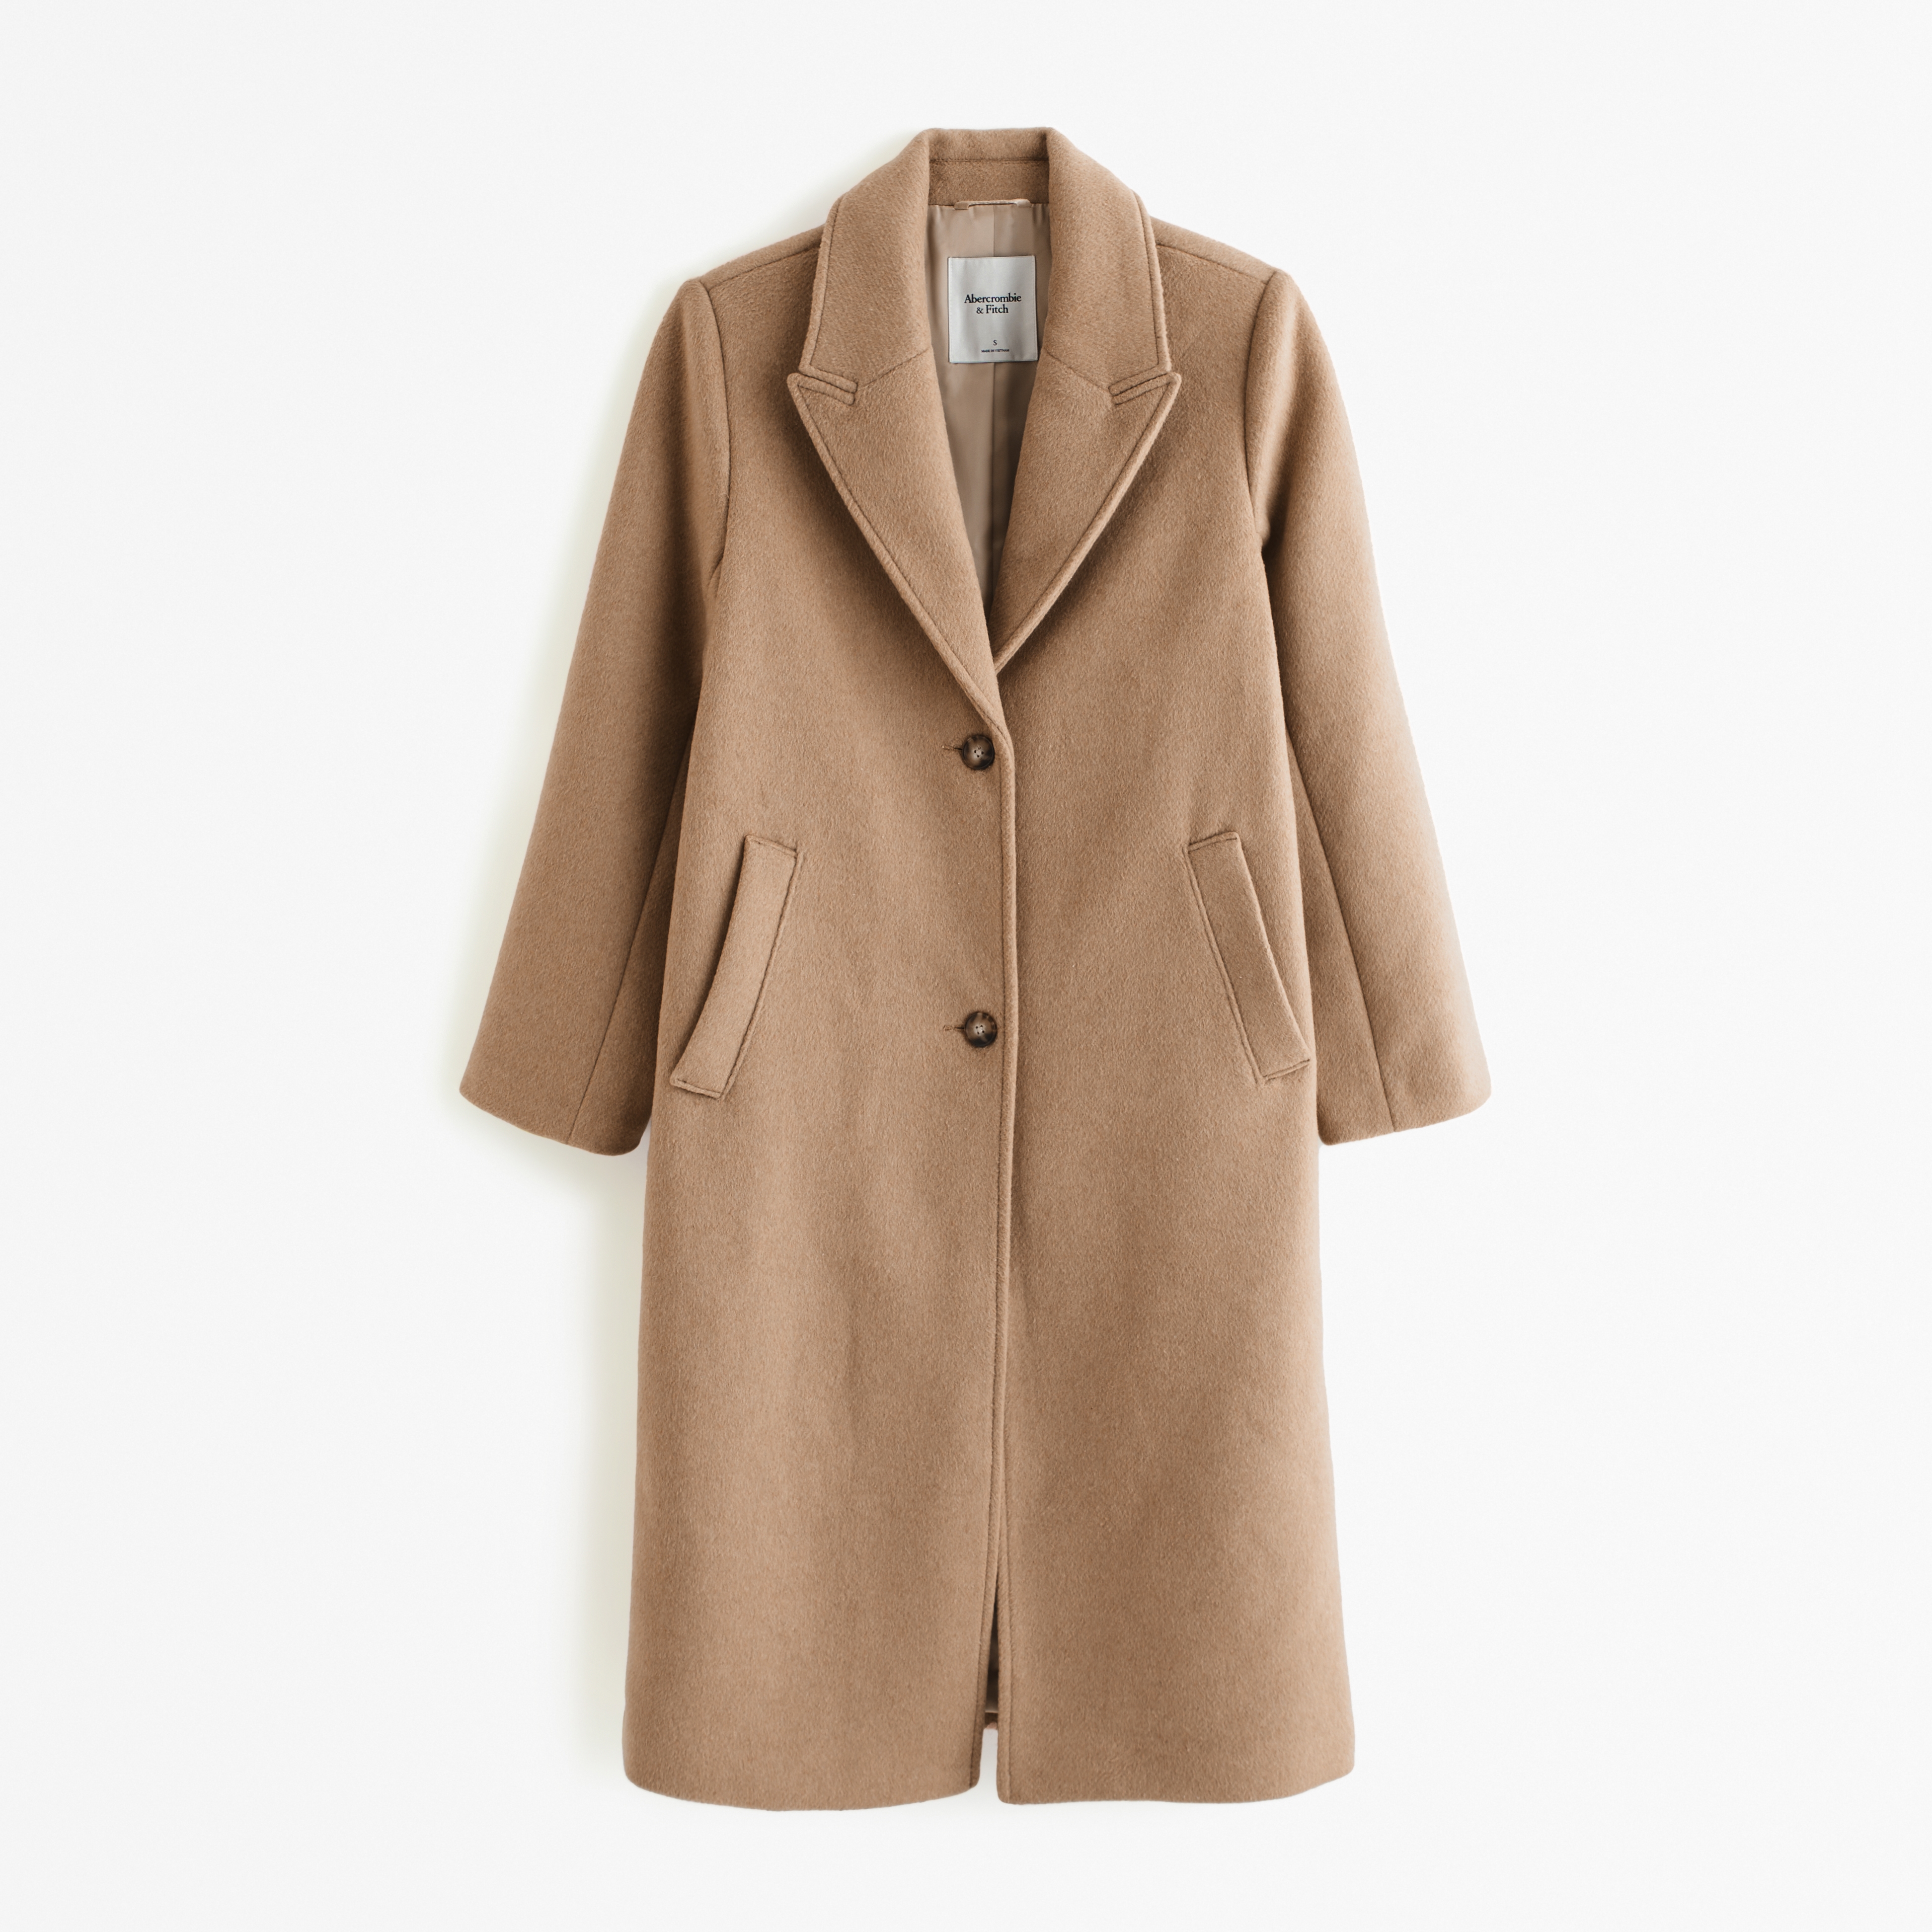 Wool-Blend Tailored Topcoat